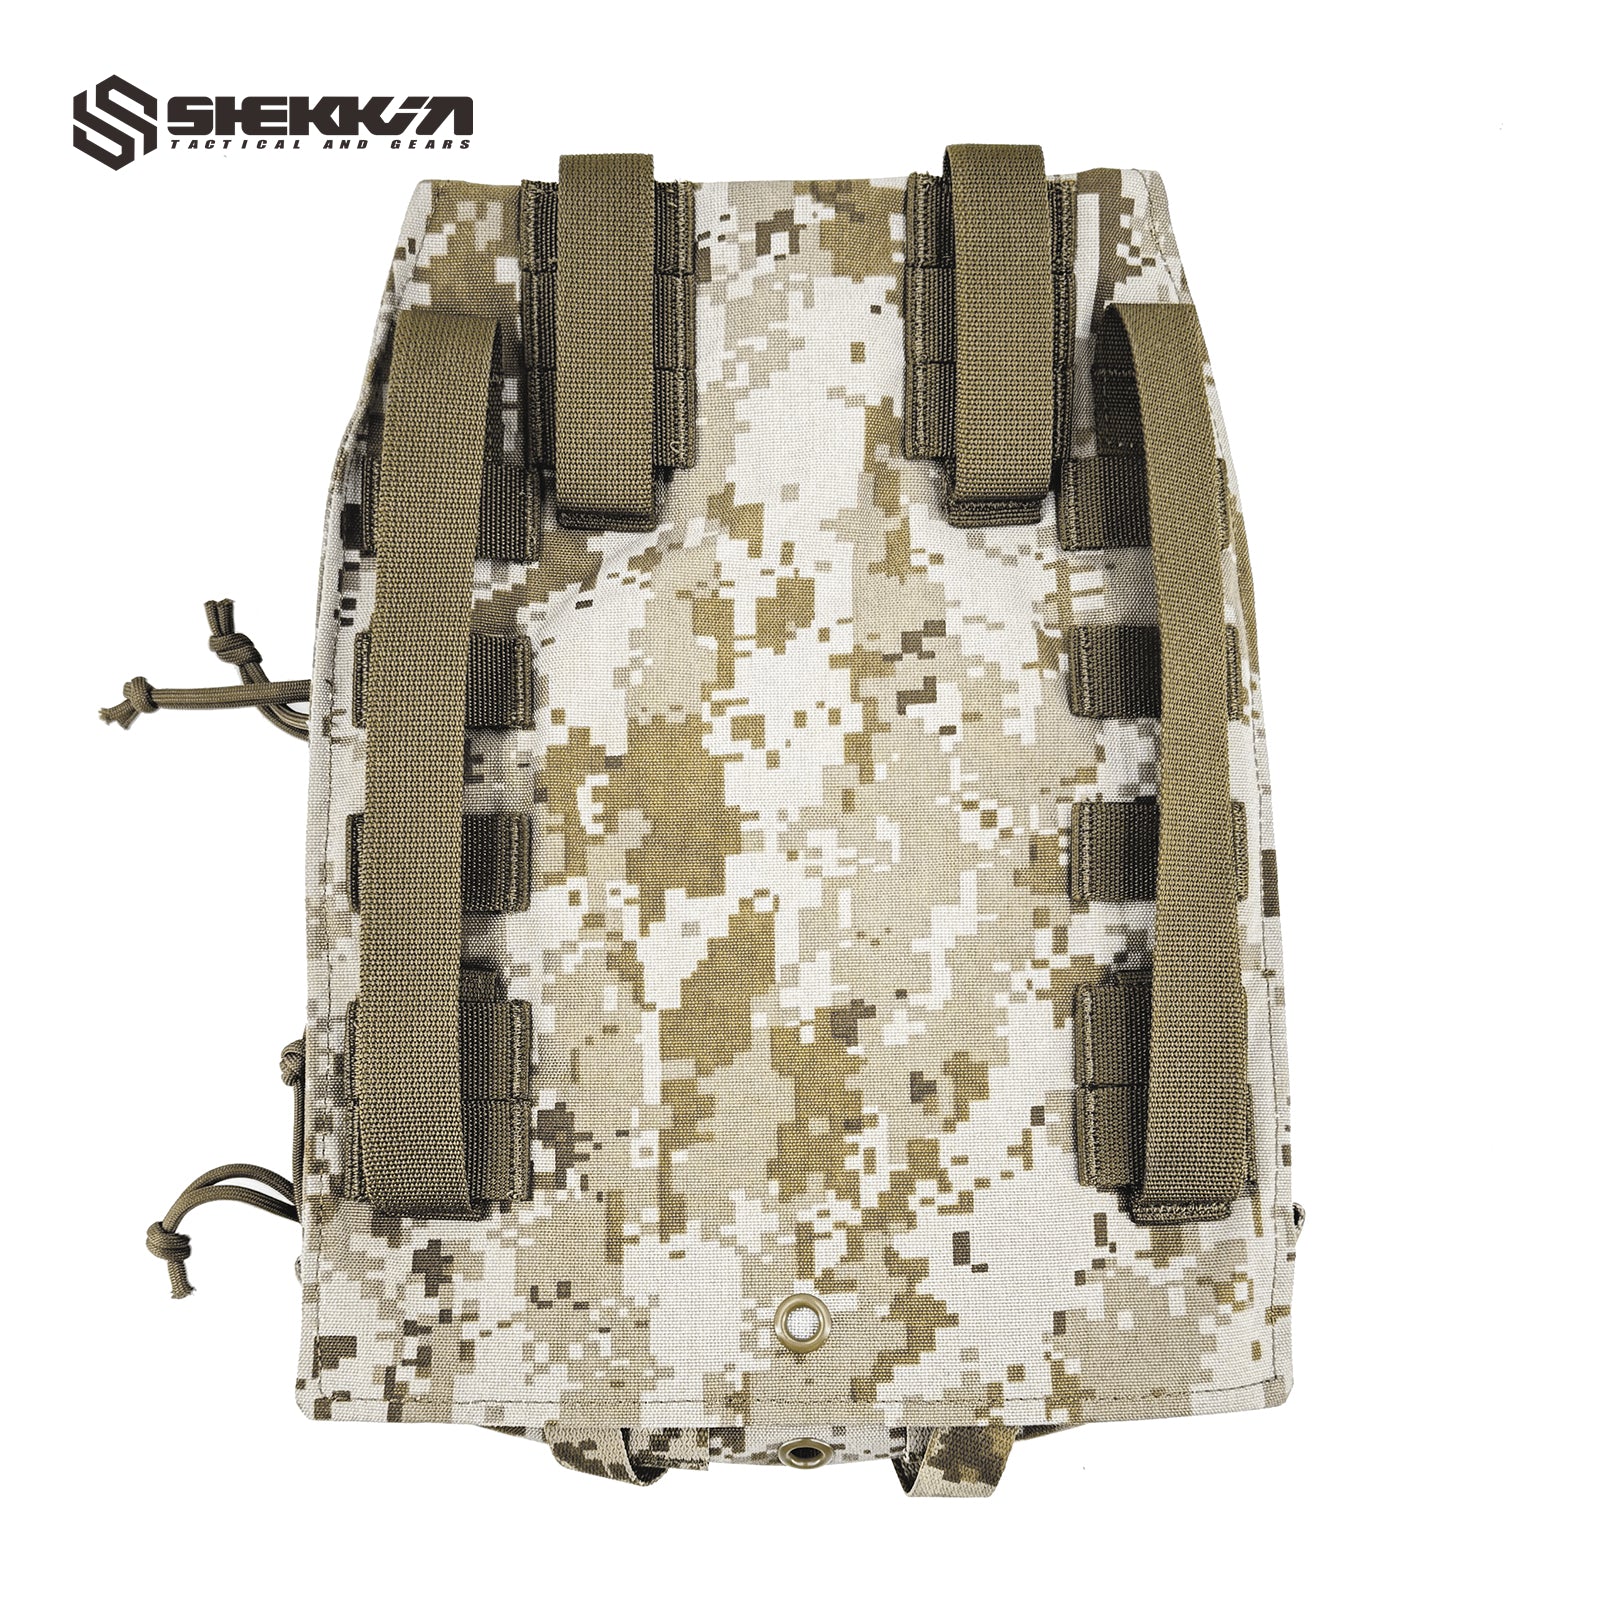 Special force tactical gear Multicam Mayflower style assault BackPanel